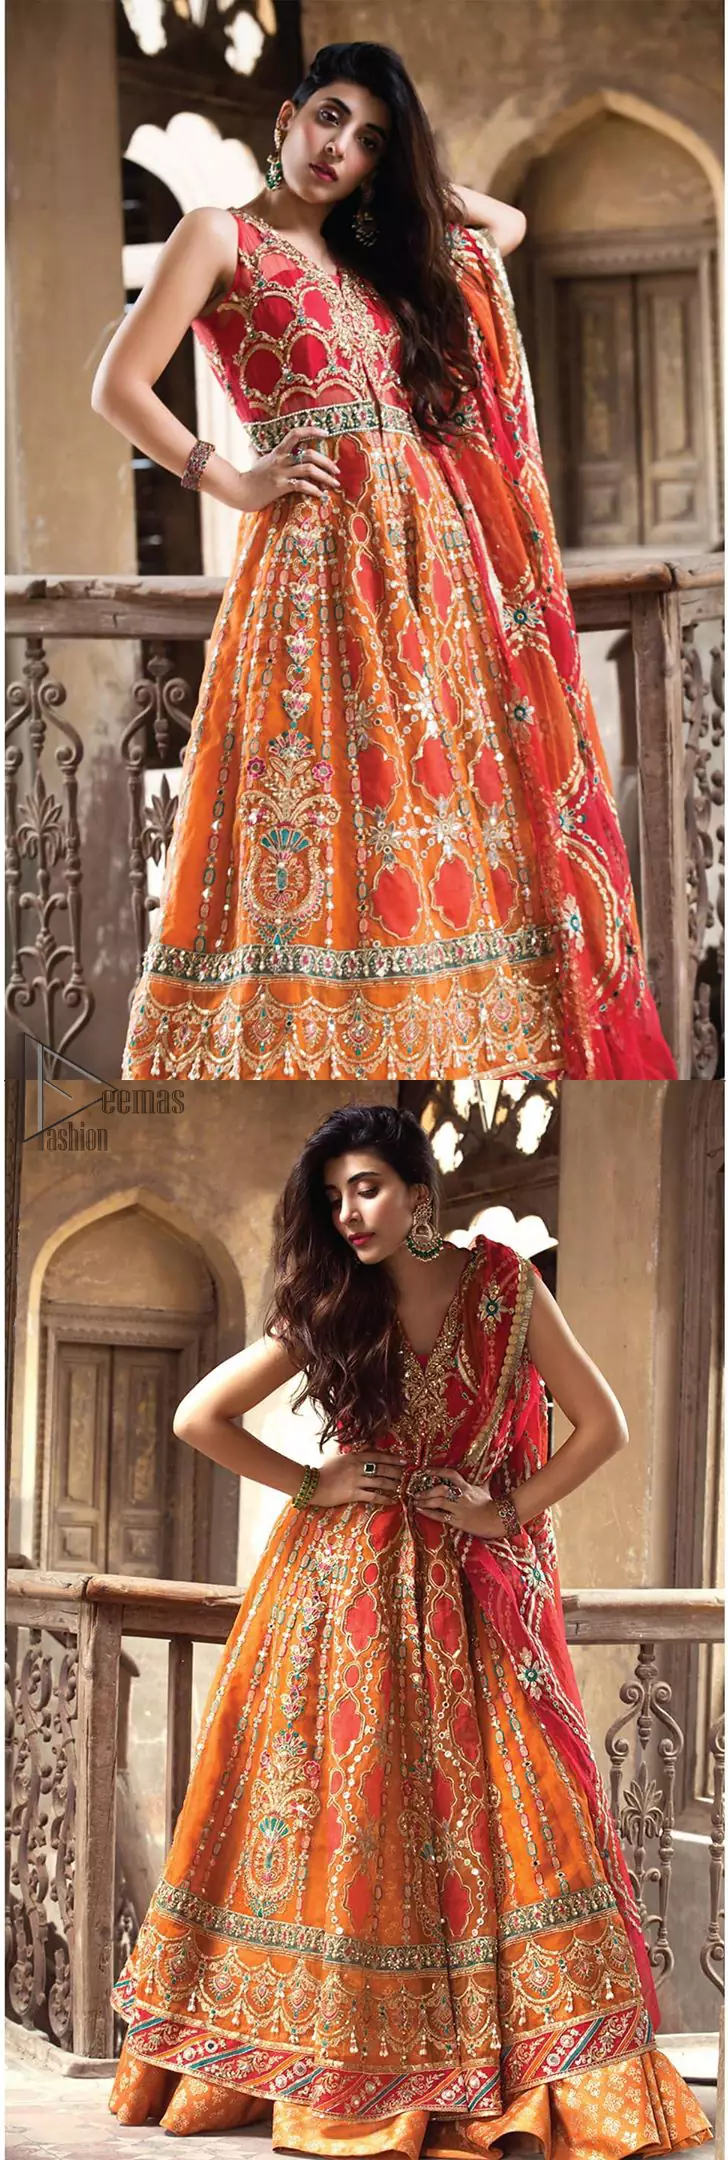 This artisanal piece is rendered in grace and timelessness. Brighten up your look with this mix of floral and geometrical embroidery in vibrant tones spread across on red and orange canvas. The front open pishwas is delicately crafted with zardozi work, multiple color embroidery and mirror work. Furthermore it is also adorned with green embellished applique and the colorful applique lift the whole bottom. It comprises with orange sharara. Finished the dress with red and orange organza dupatta with geometric patterns on the ground.
